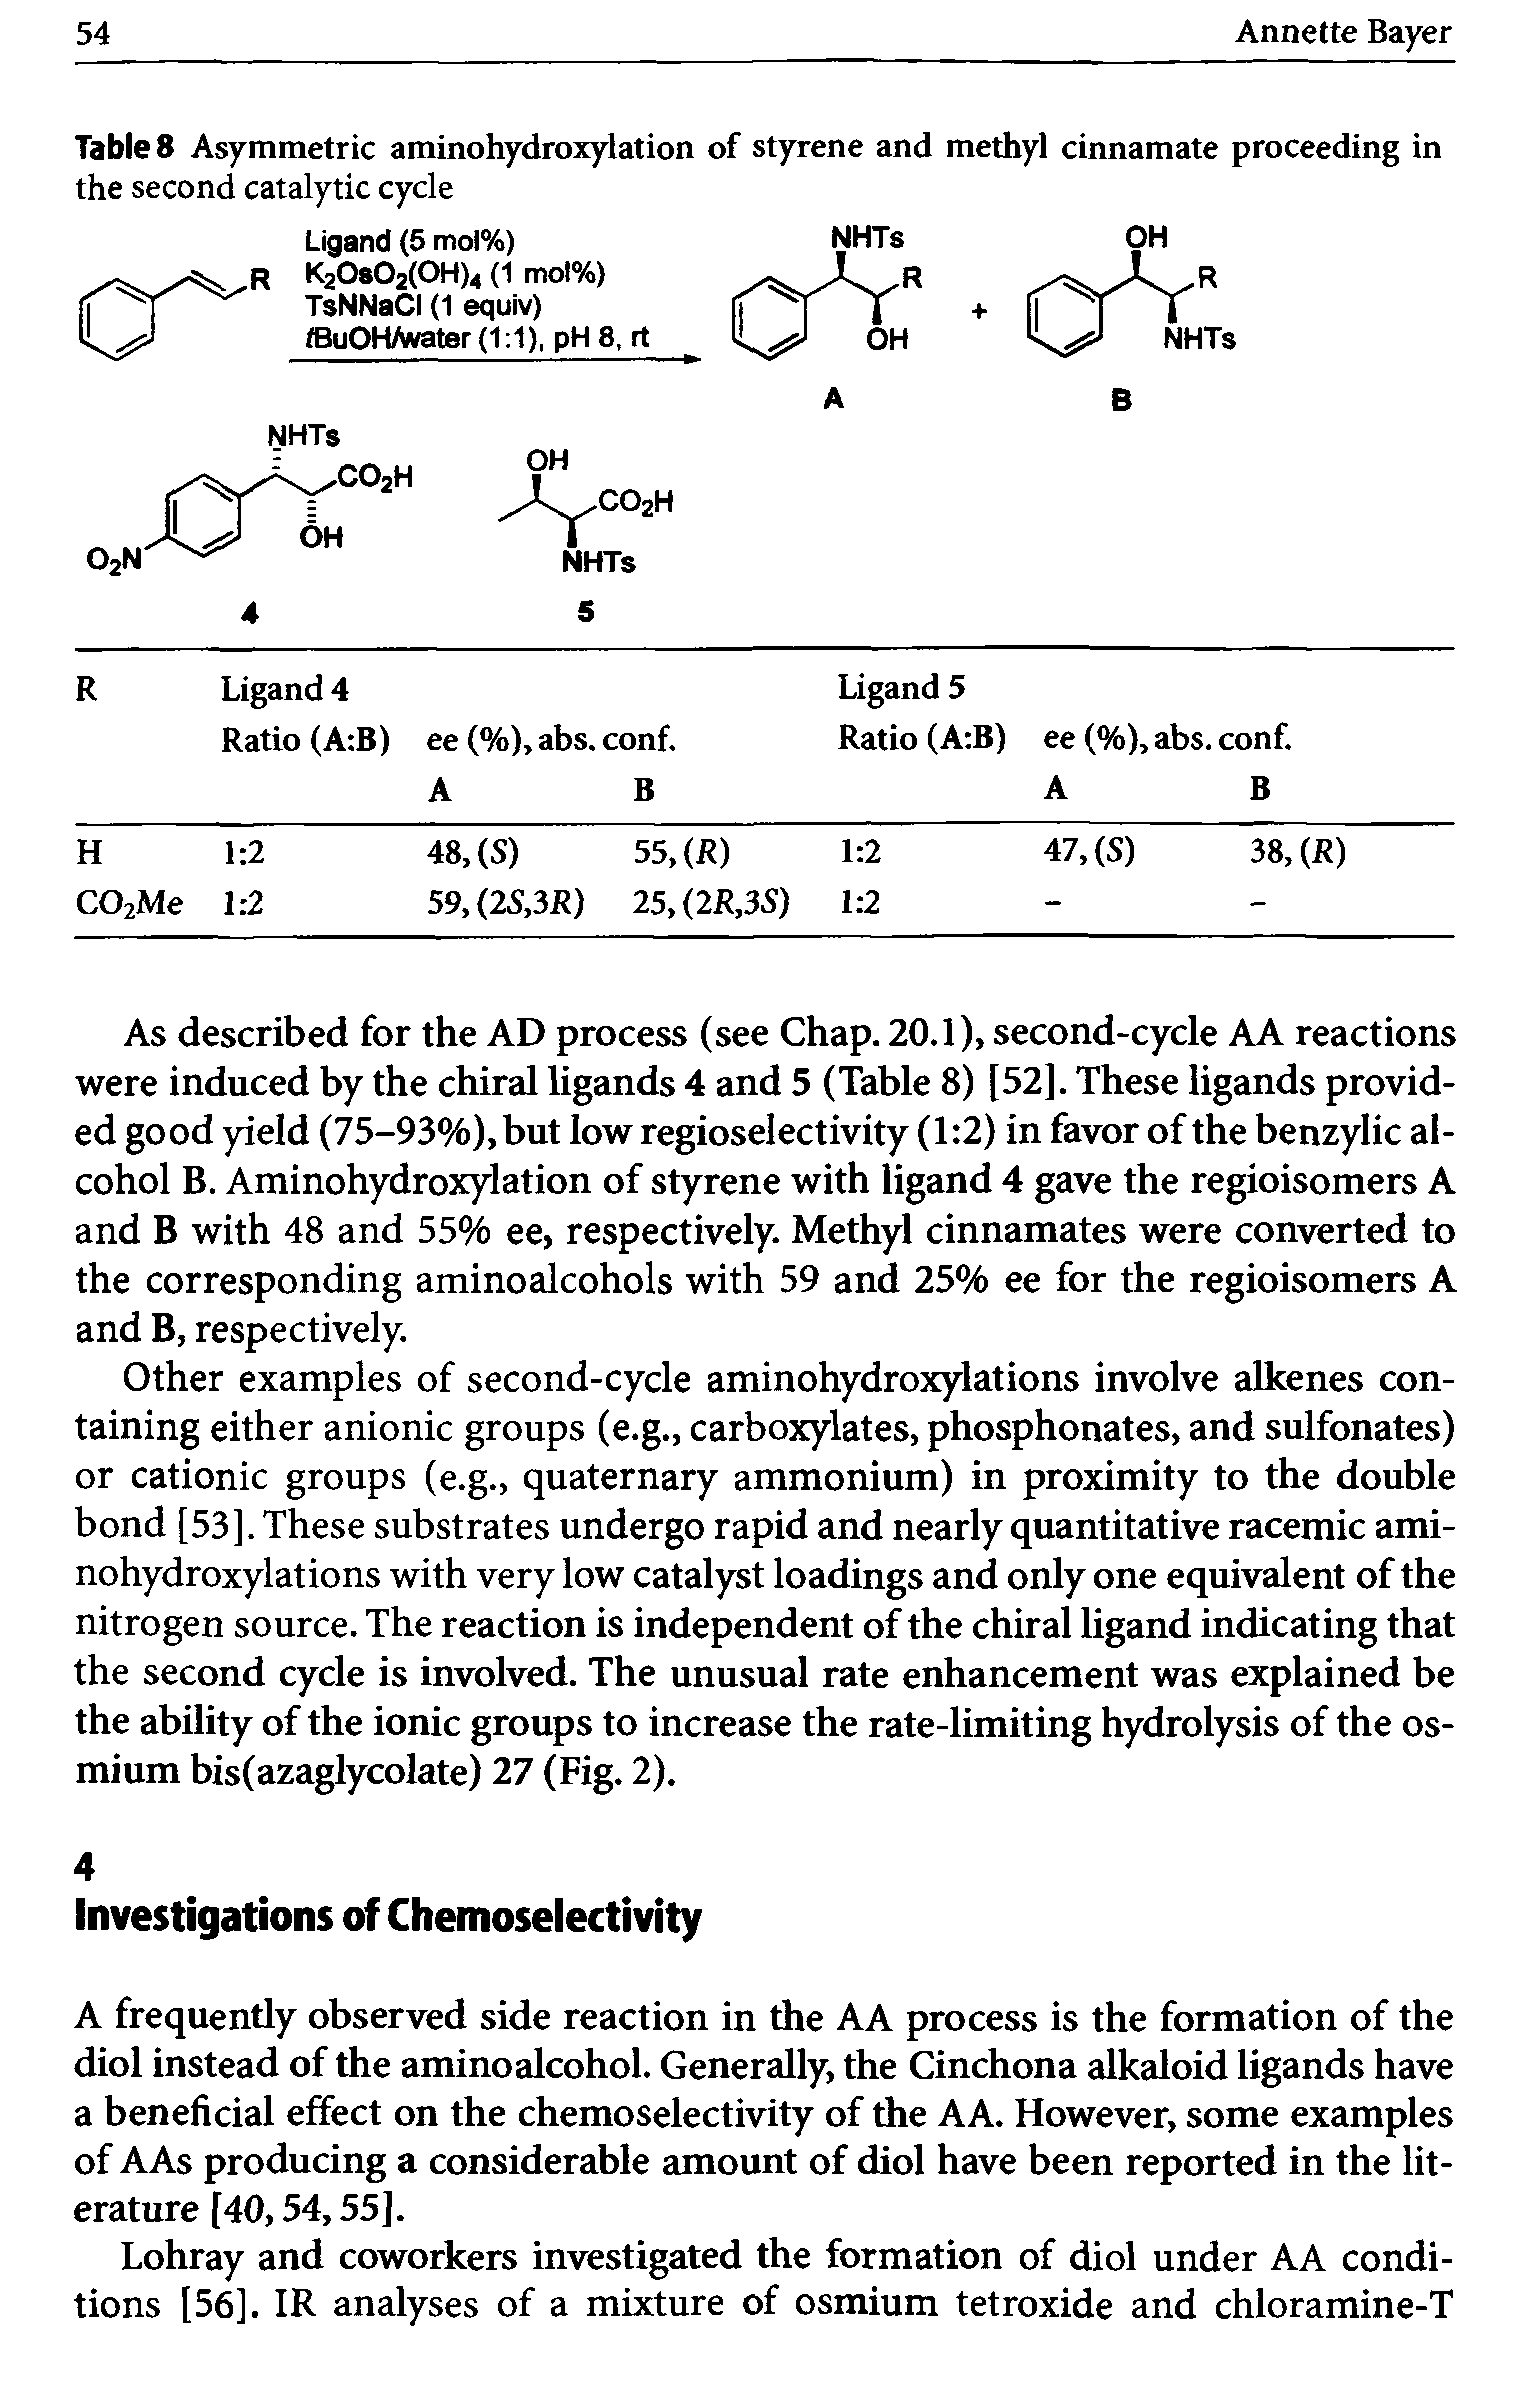 Table 8 Asymmetric aminohydroxylation of styrene and methyl cinnamate proceeding in the second catalytic cycle...